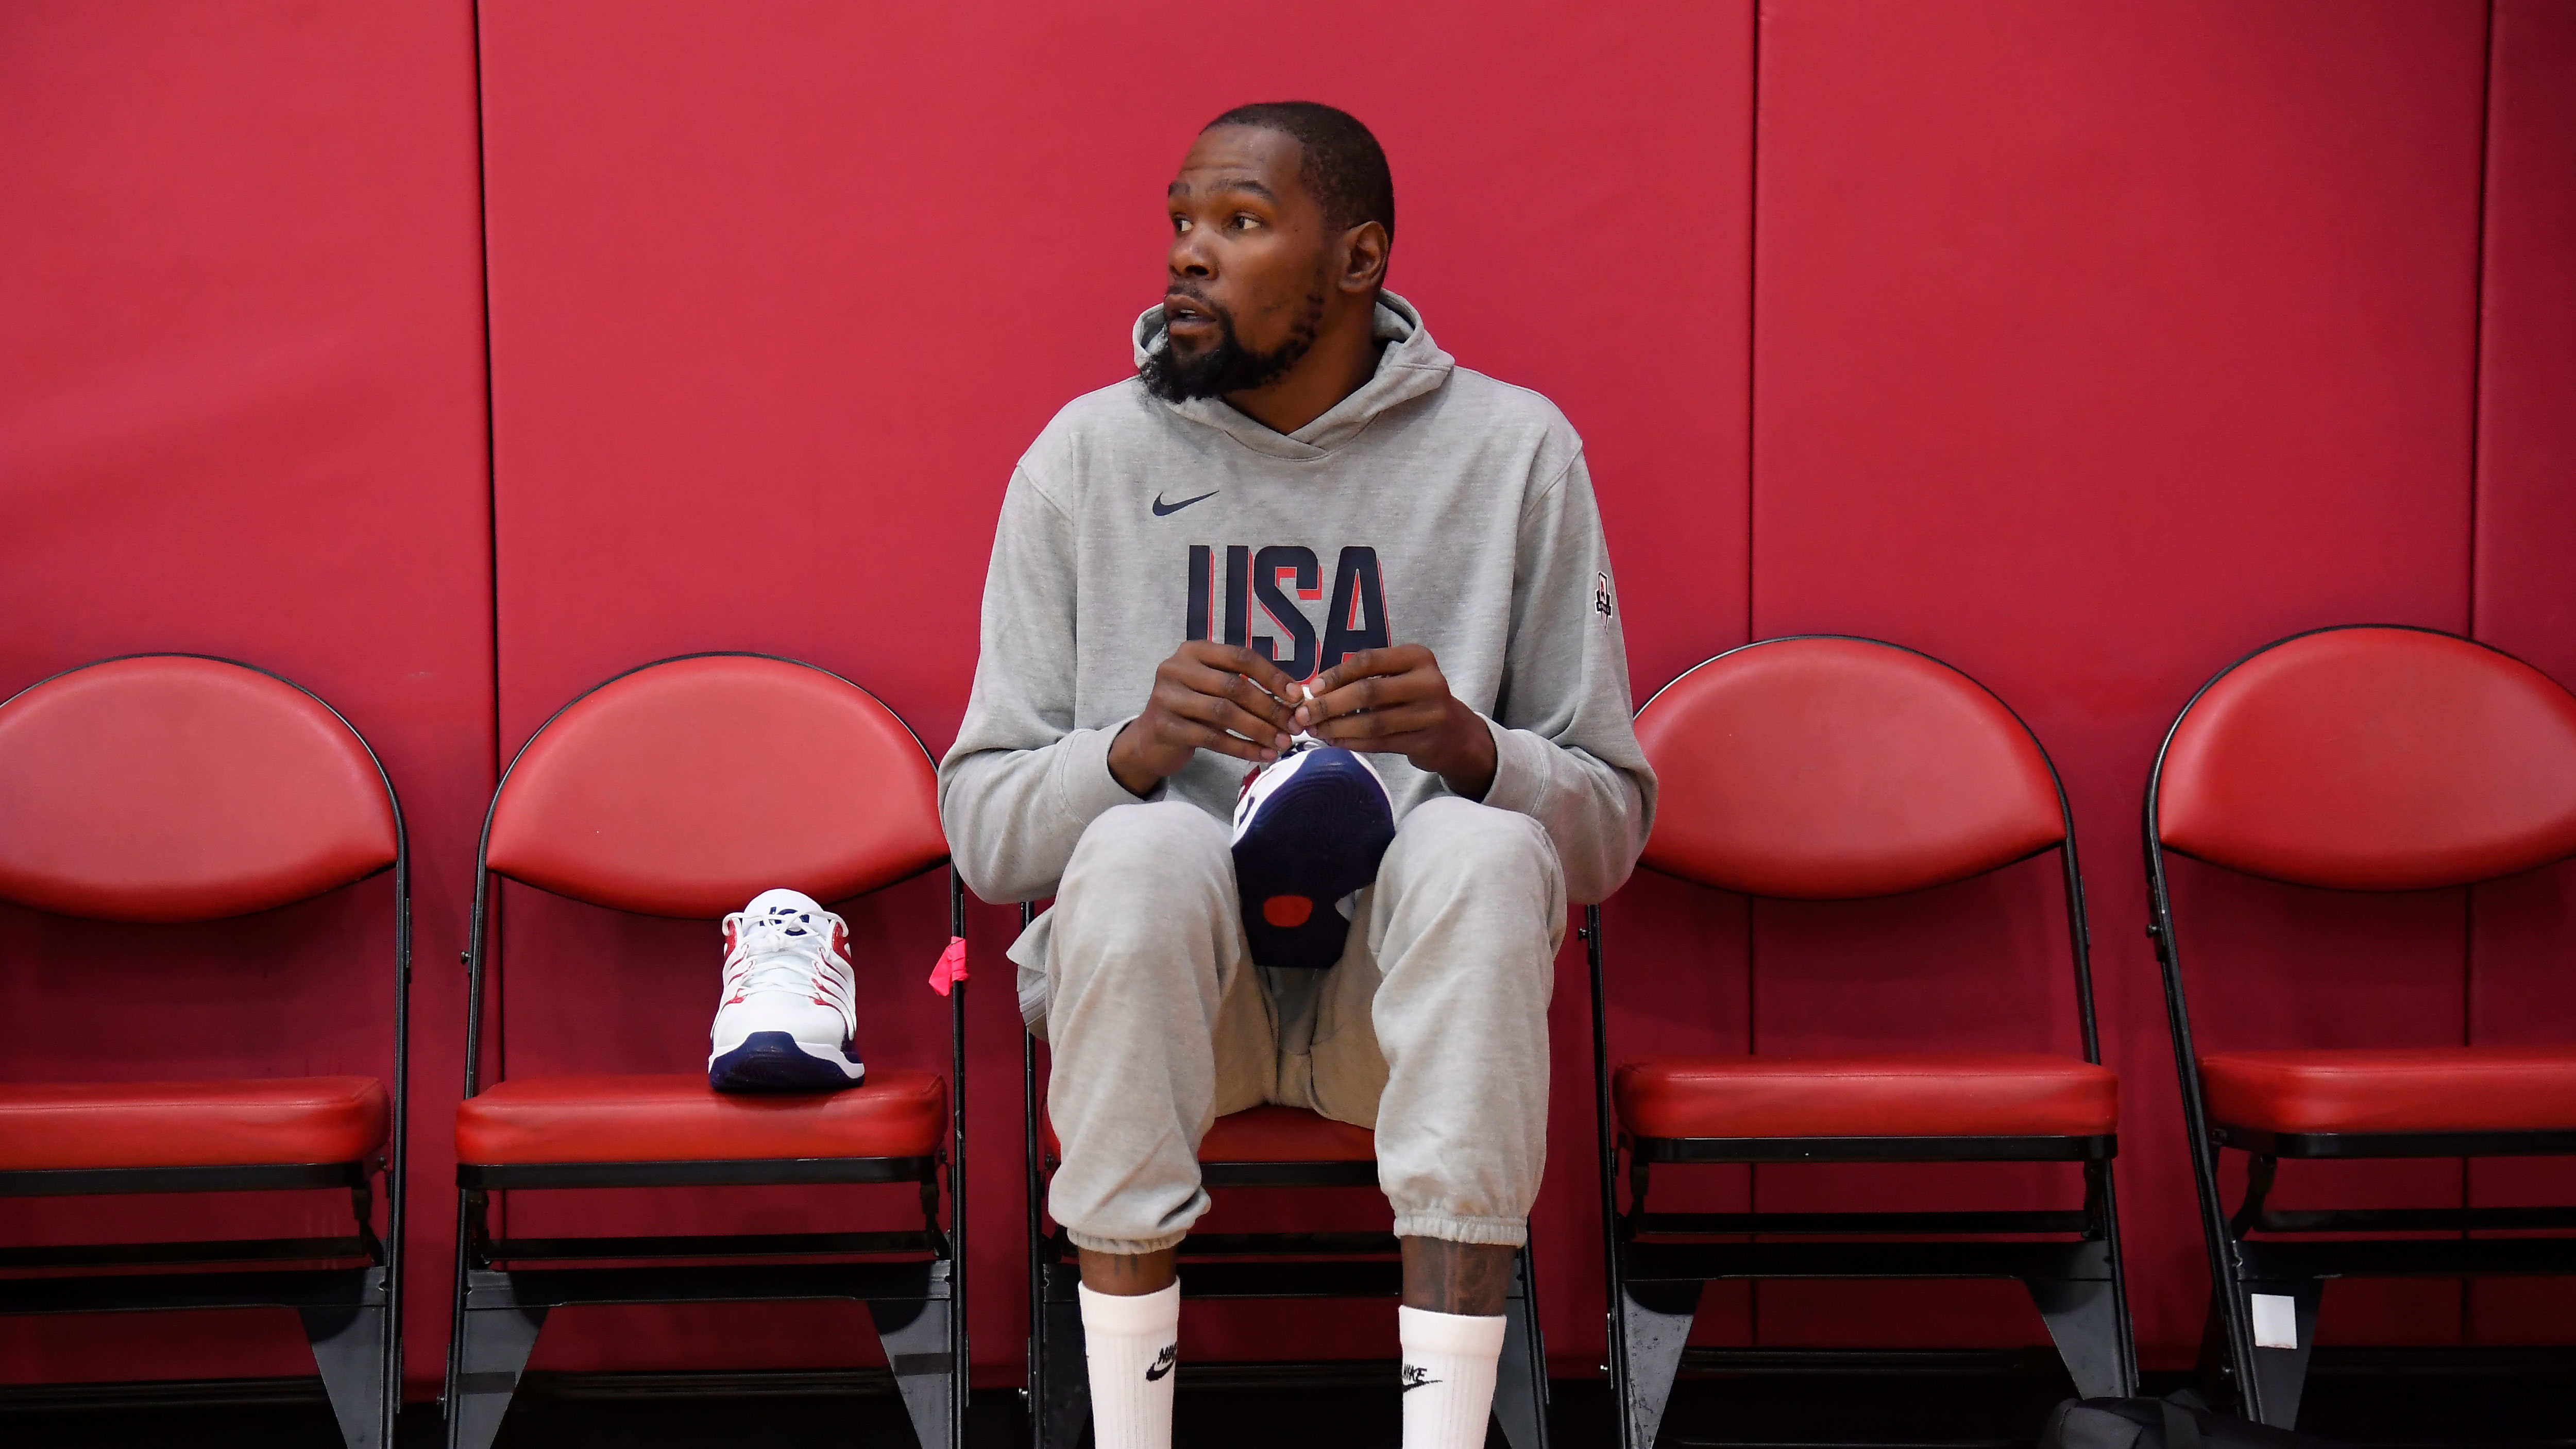 Kevin Durant to miss Team USA's first exhibition vs. Canada with calf injury